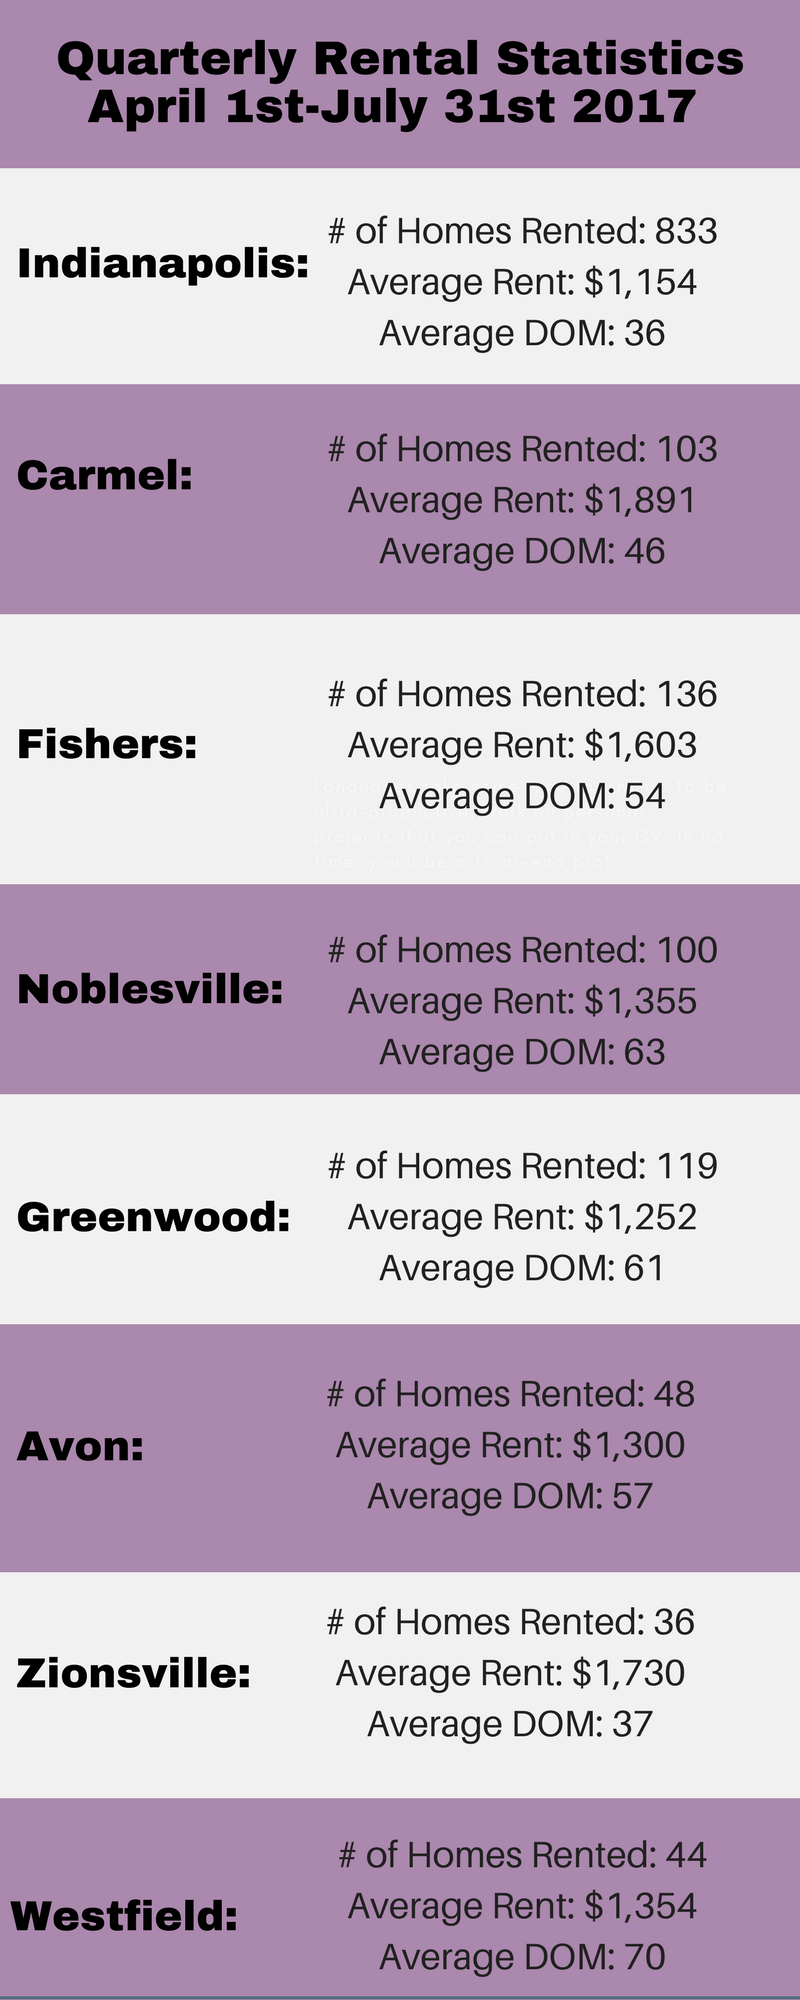 central indiana rental statistics infographic 